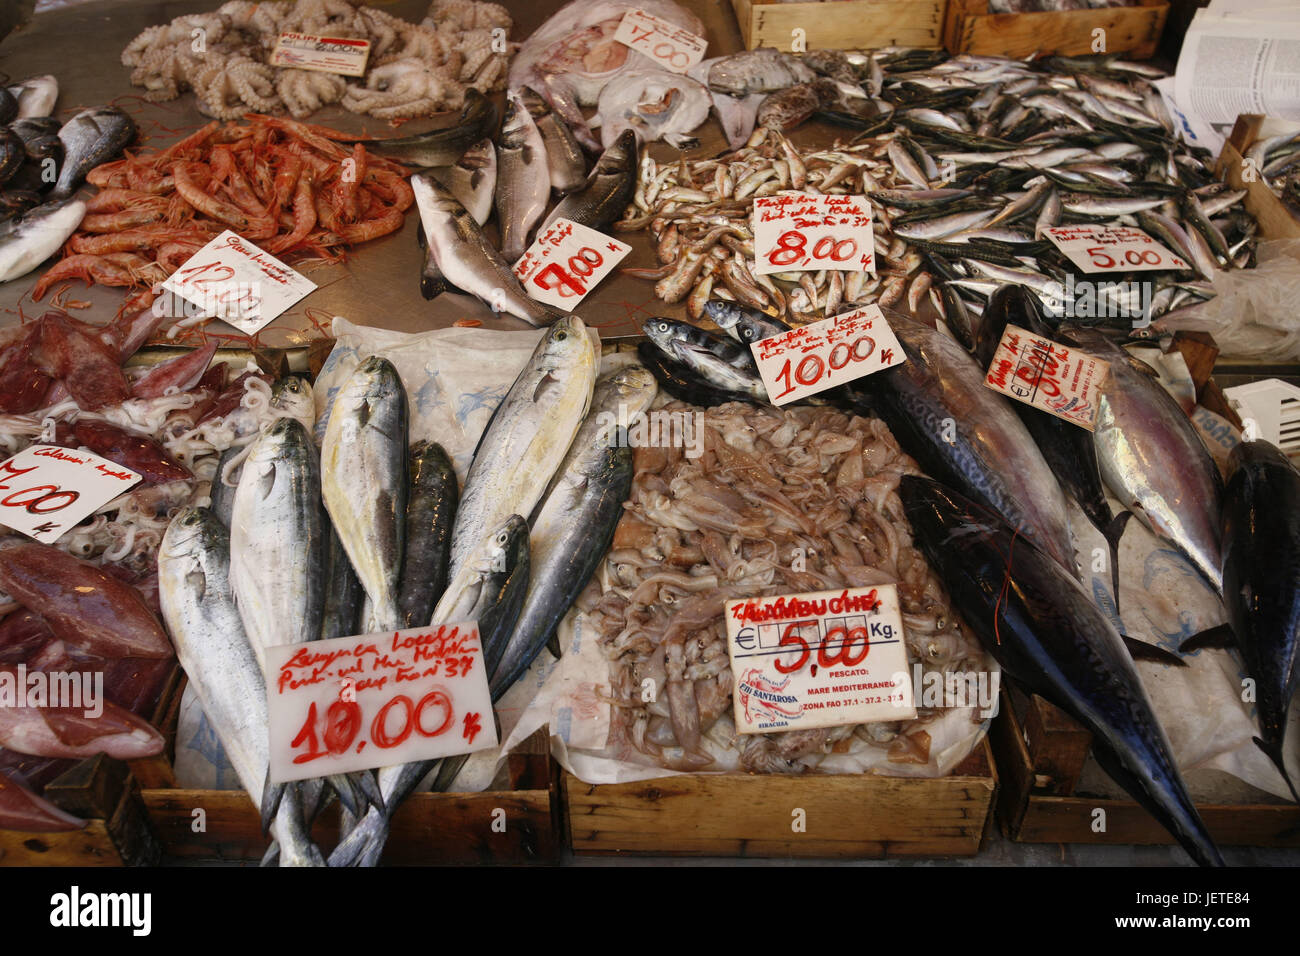 Italy, Sicily, island Ortygia, Syracuse, Old Town, fish market, Southern Europe, Siracusa, weekly market, market, market stall, sales, fish, food fish, sea animals, retail trades, choice, variety, price tags, Stock Photo